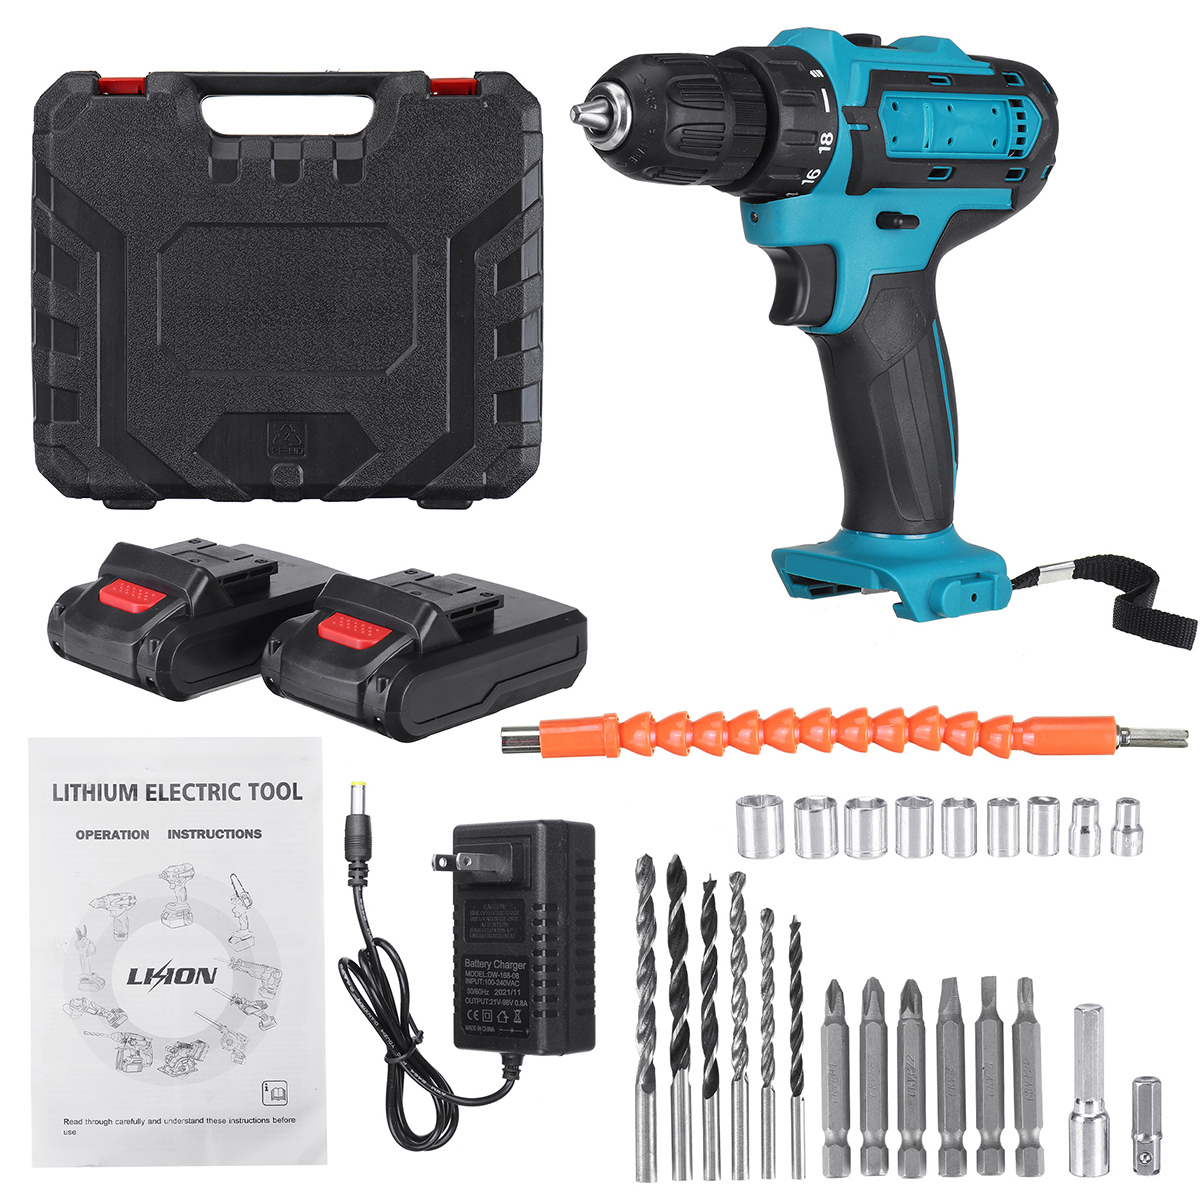 2000rpm-38Nm-21V-Lithium-Electric-Impact-Hammer-Drill-Wood-Drilling-Screwdrivers-with-Battery-1943477-14